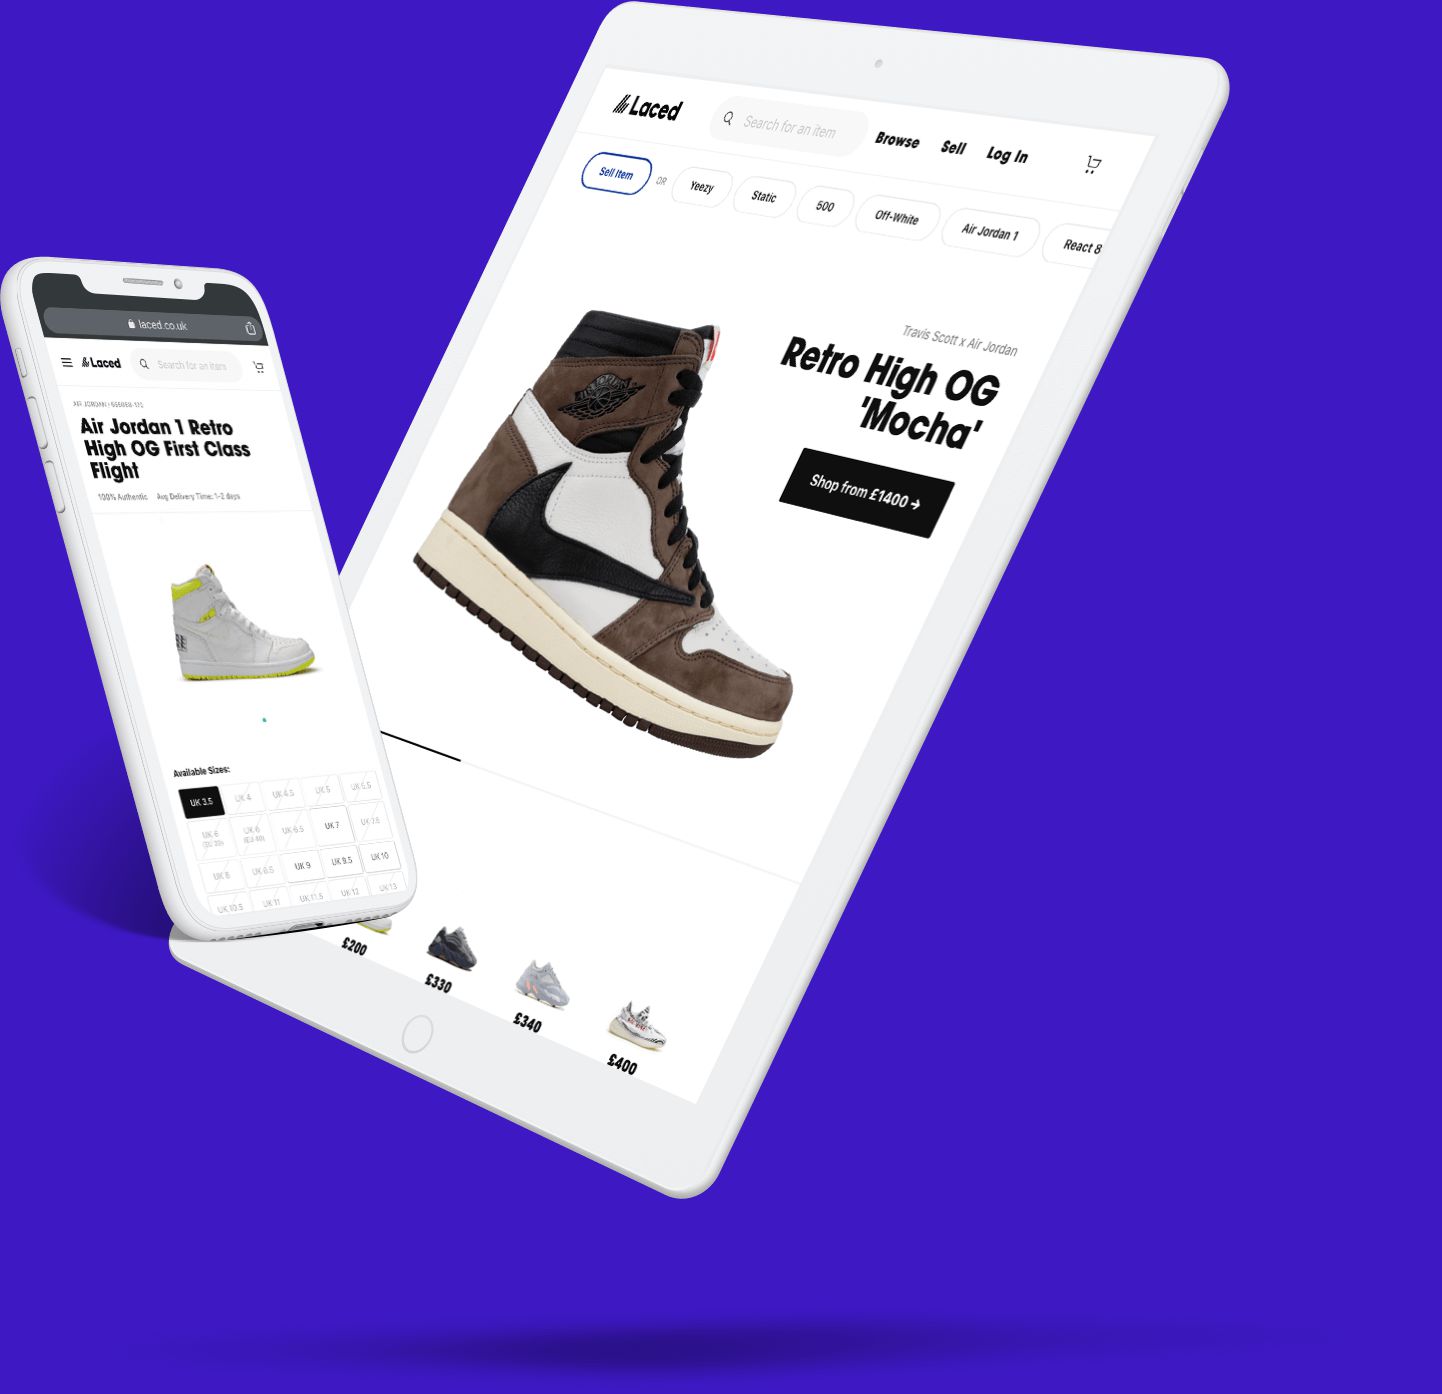 Laced's sneaker trading website shown on a tablet and mobile device.